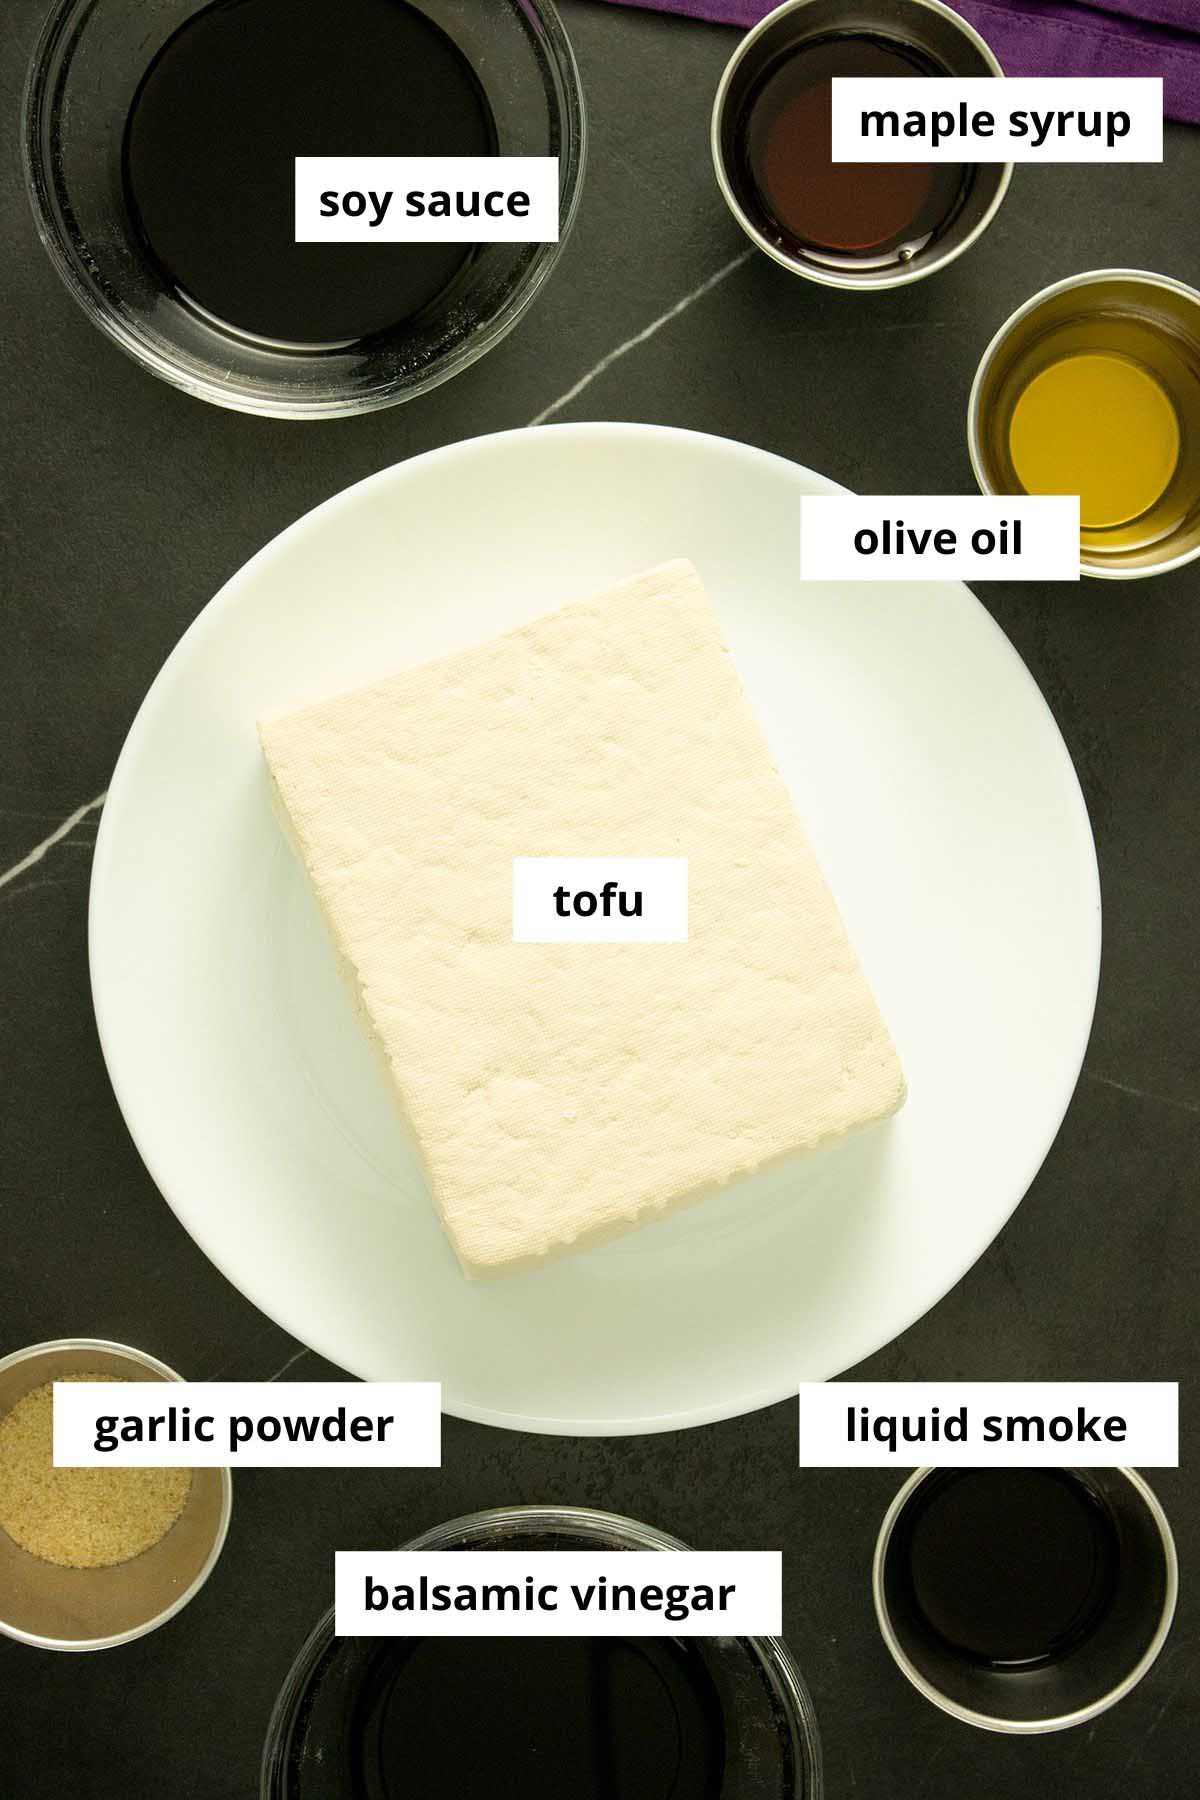 tofu and flavorings in containers on a table, labeled with text